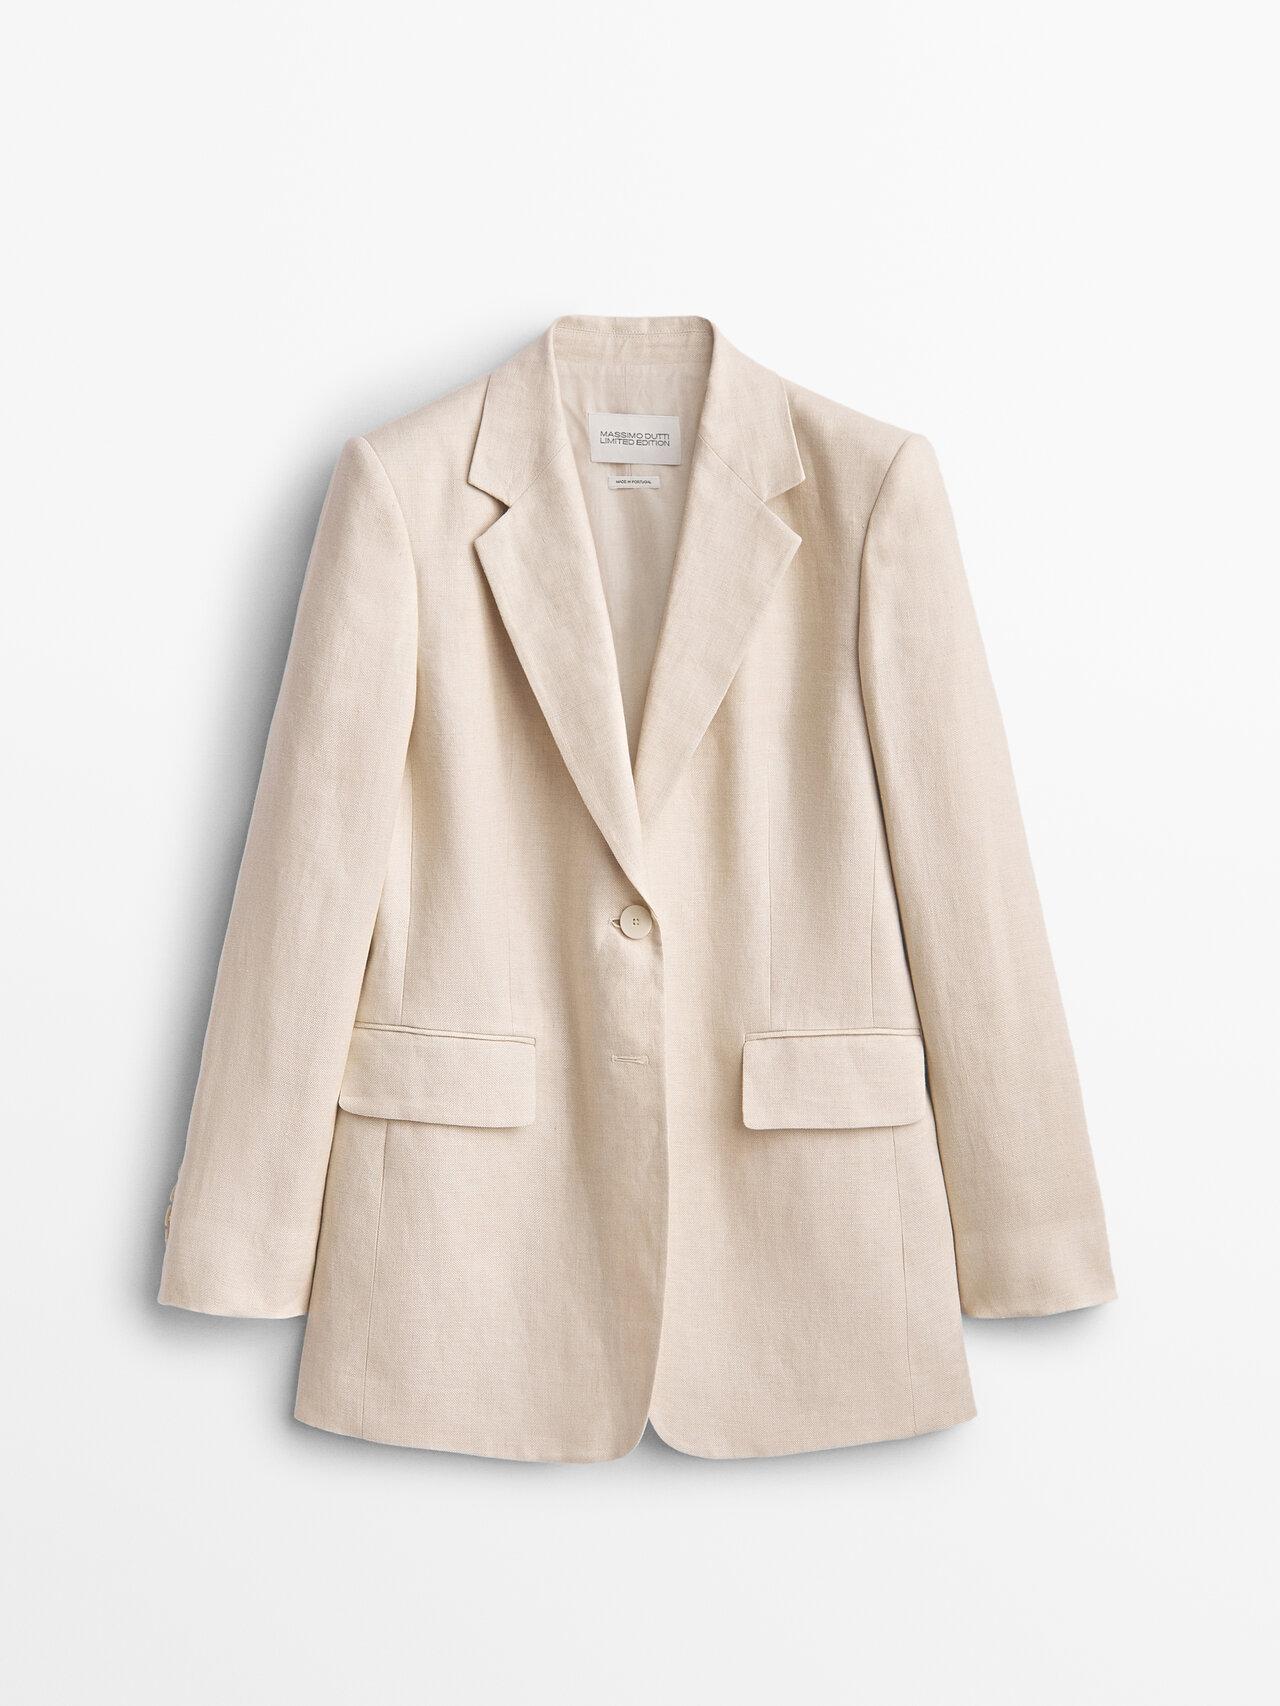 MASSIMO DUTTI Linen Blazer With Two Buttons - Limited Edition in Natural |  Lyst